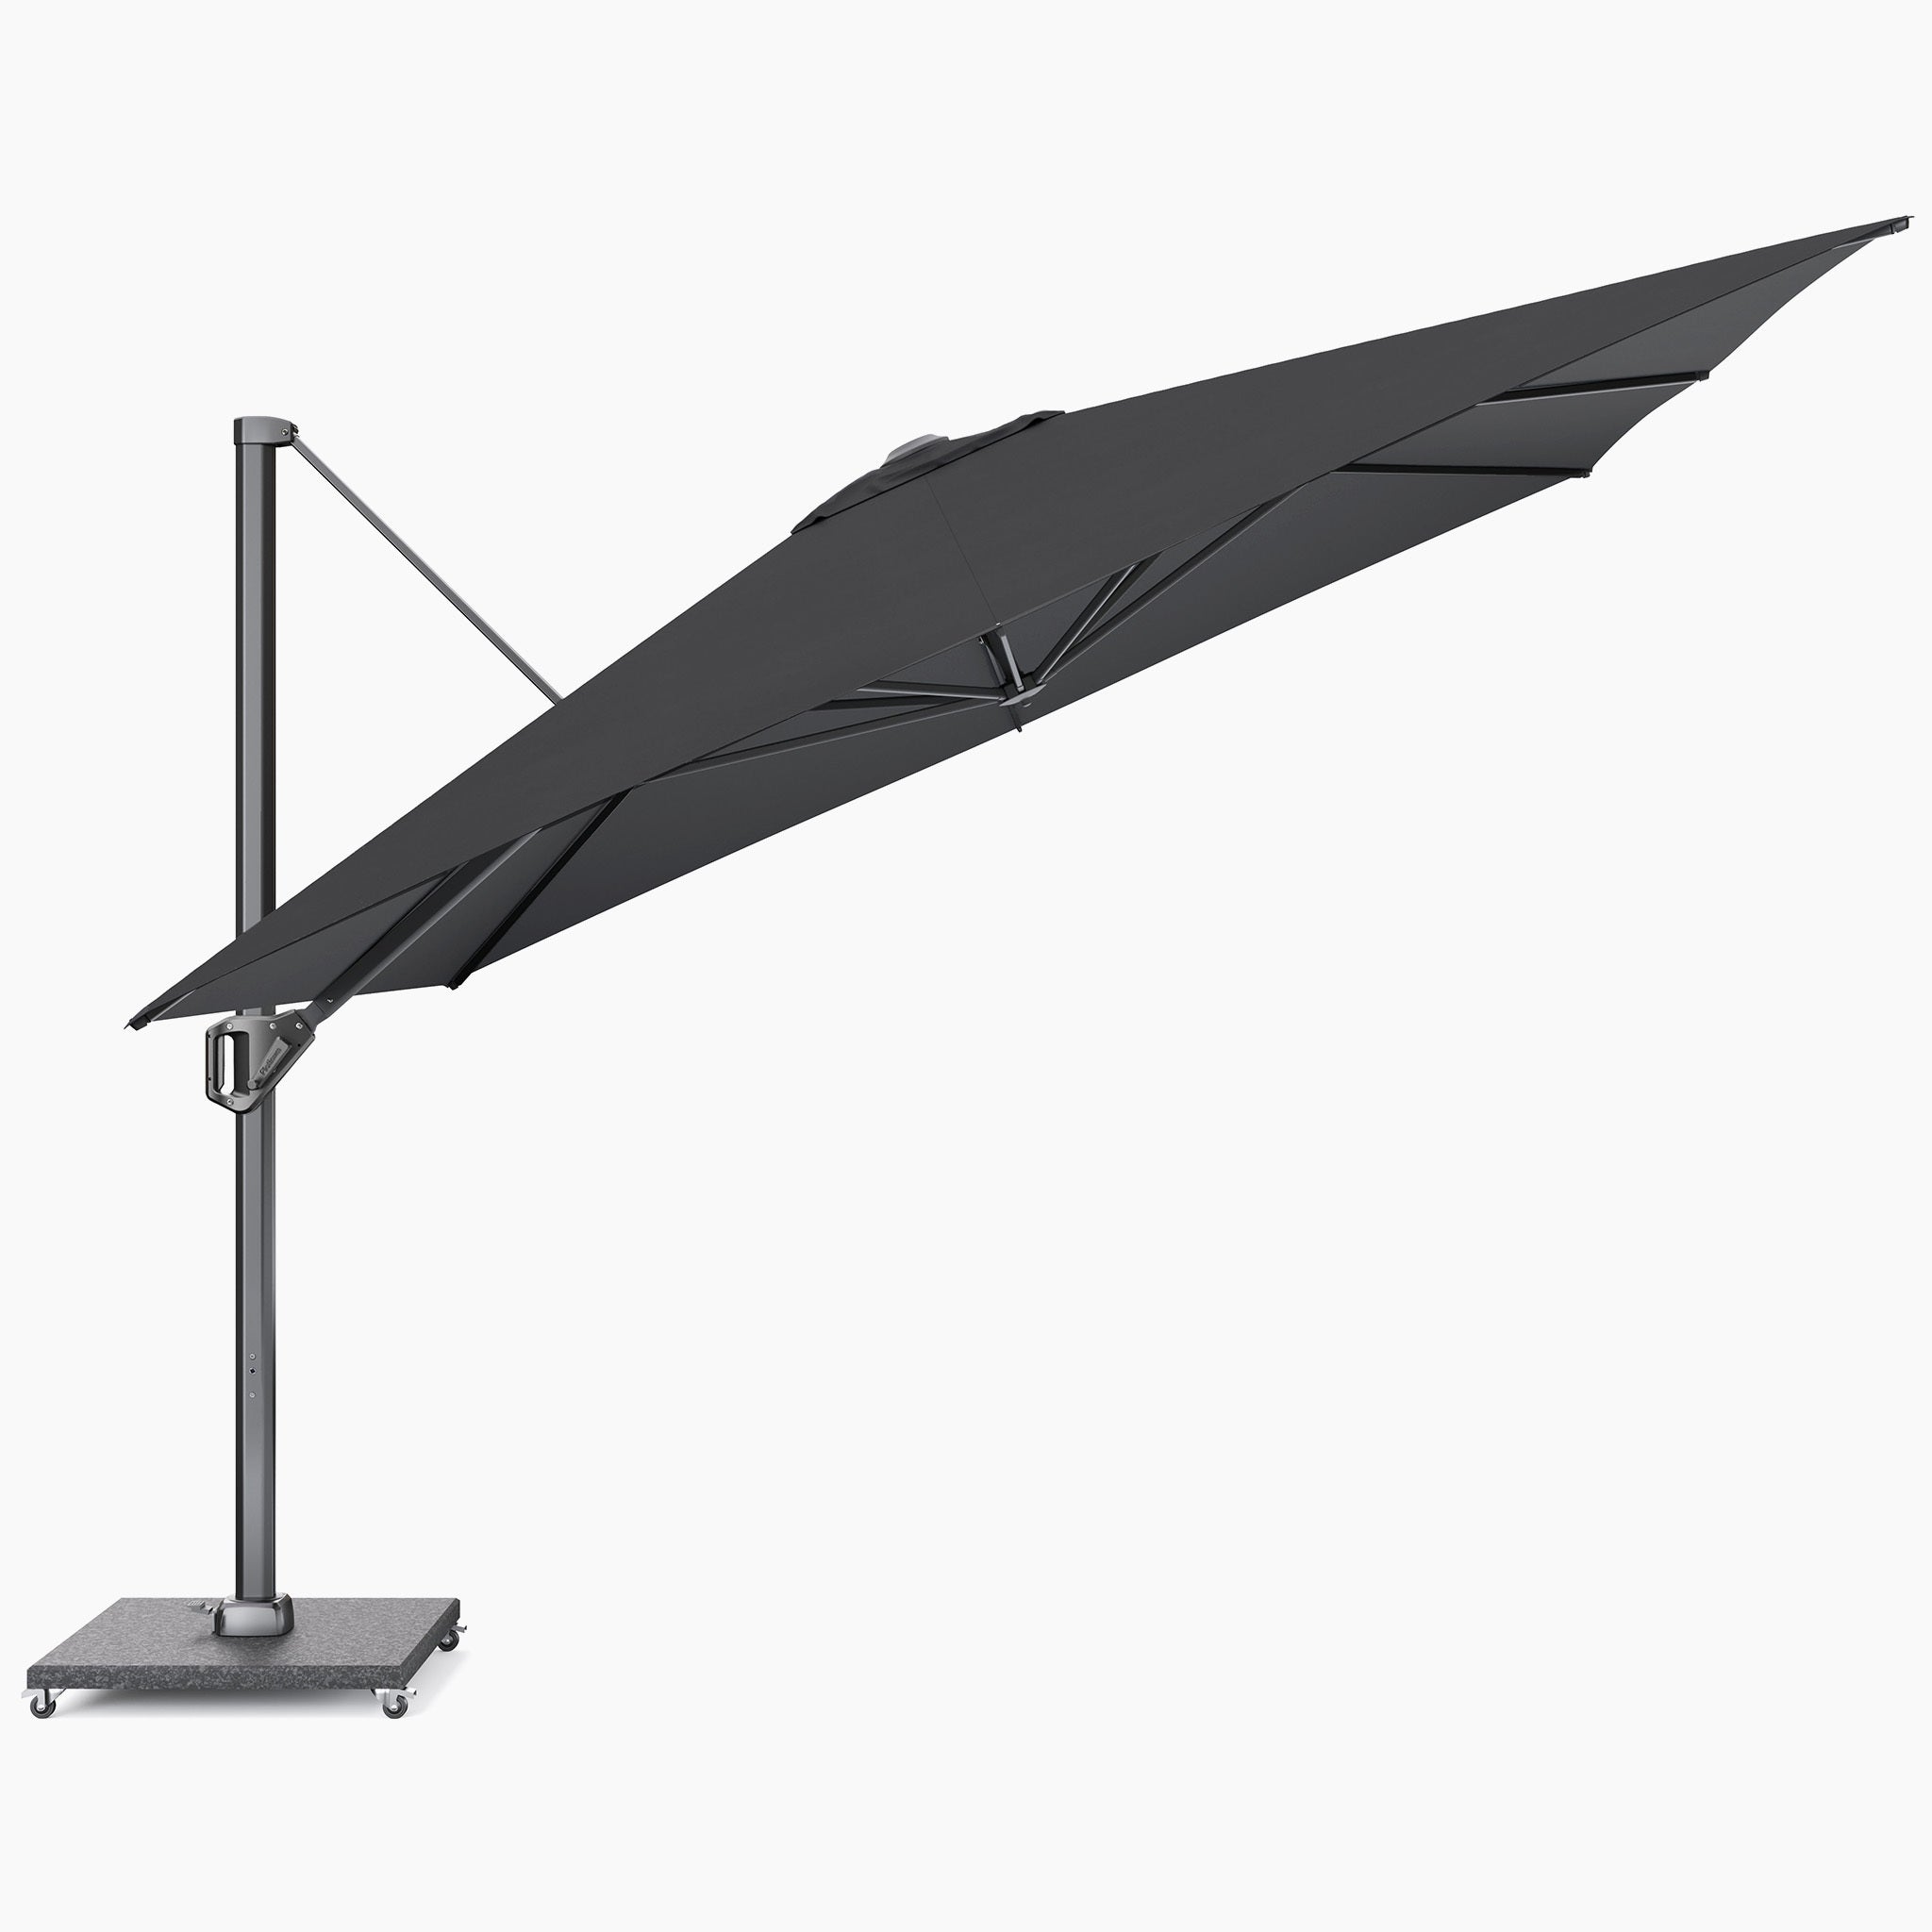 Challenger Telescopic T1 3.5m Square Cantilever Parasol in Anthracite